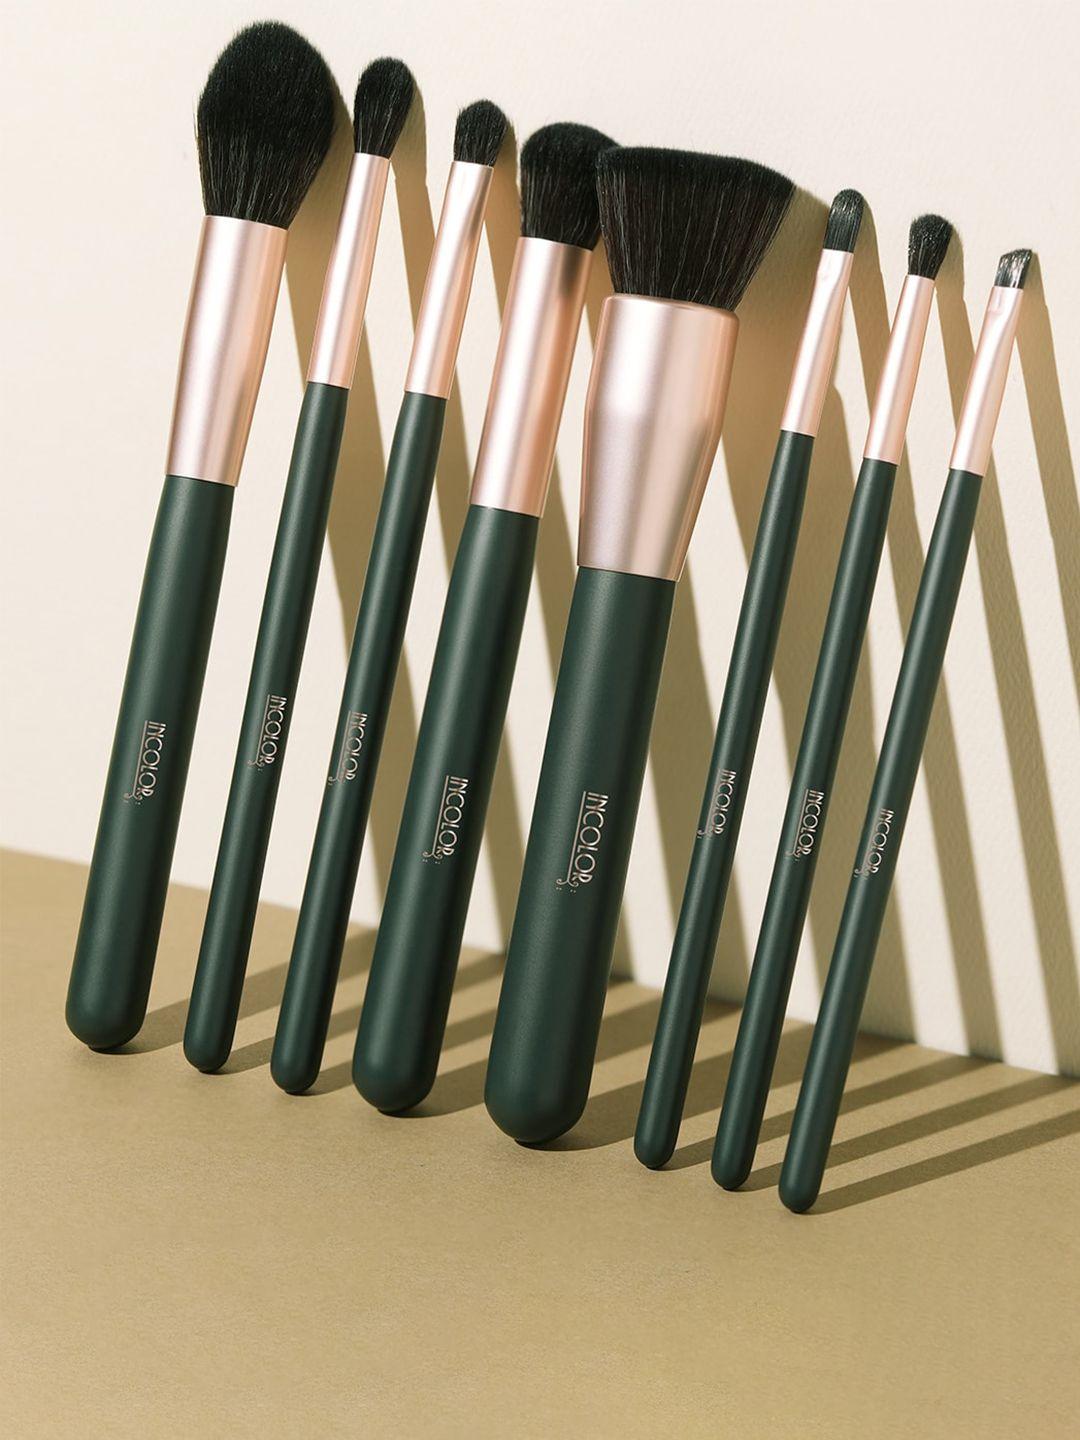 incolor beauty most wanted set of 8 face makeup brushes